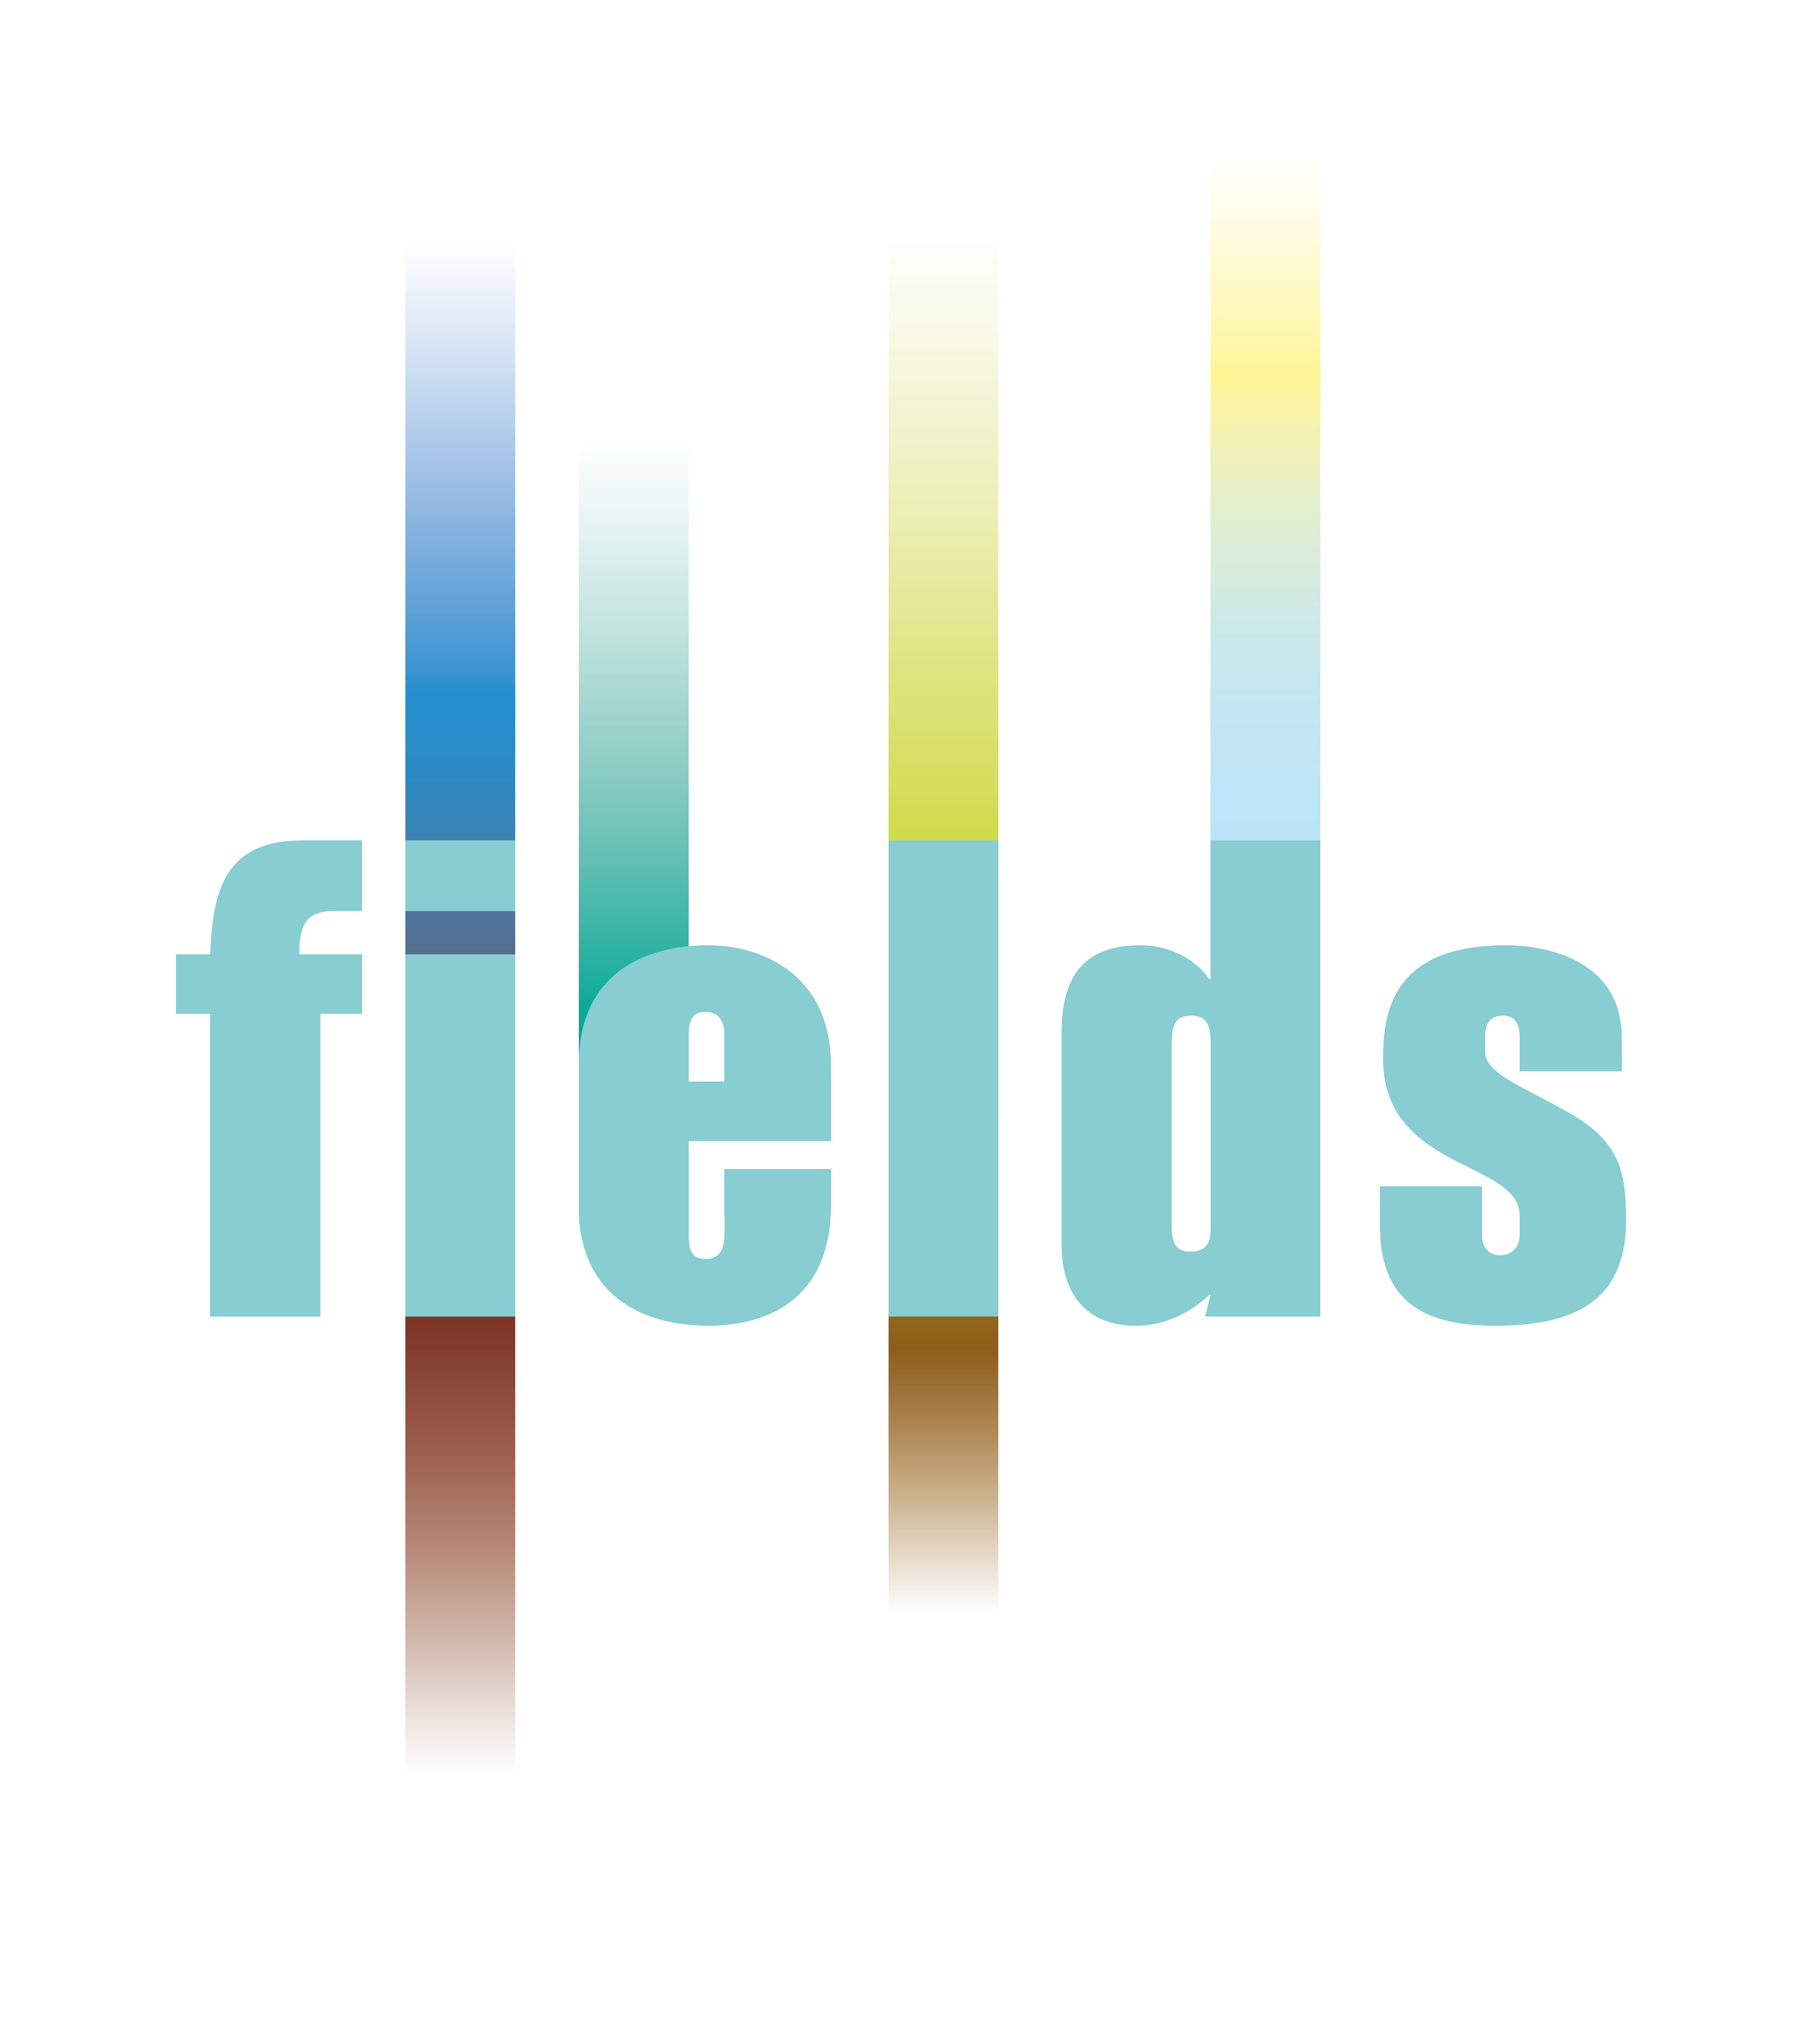 FIELDS: Addressing the current and future skIll needs for sustainability, digitalisation, and the bio-economy in agriculture